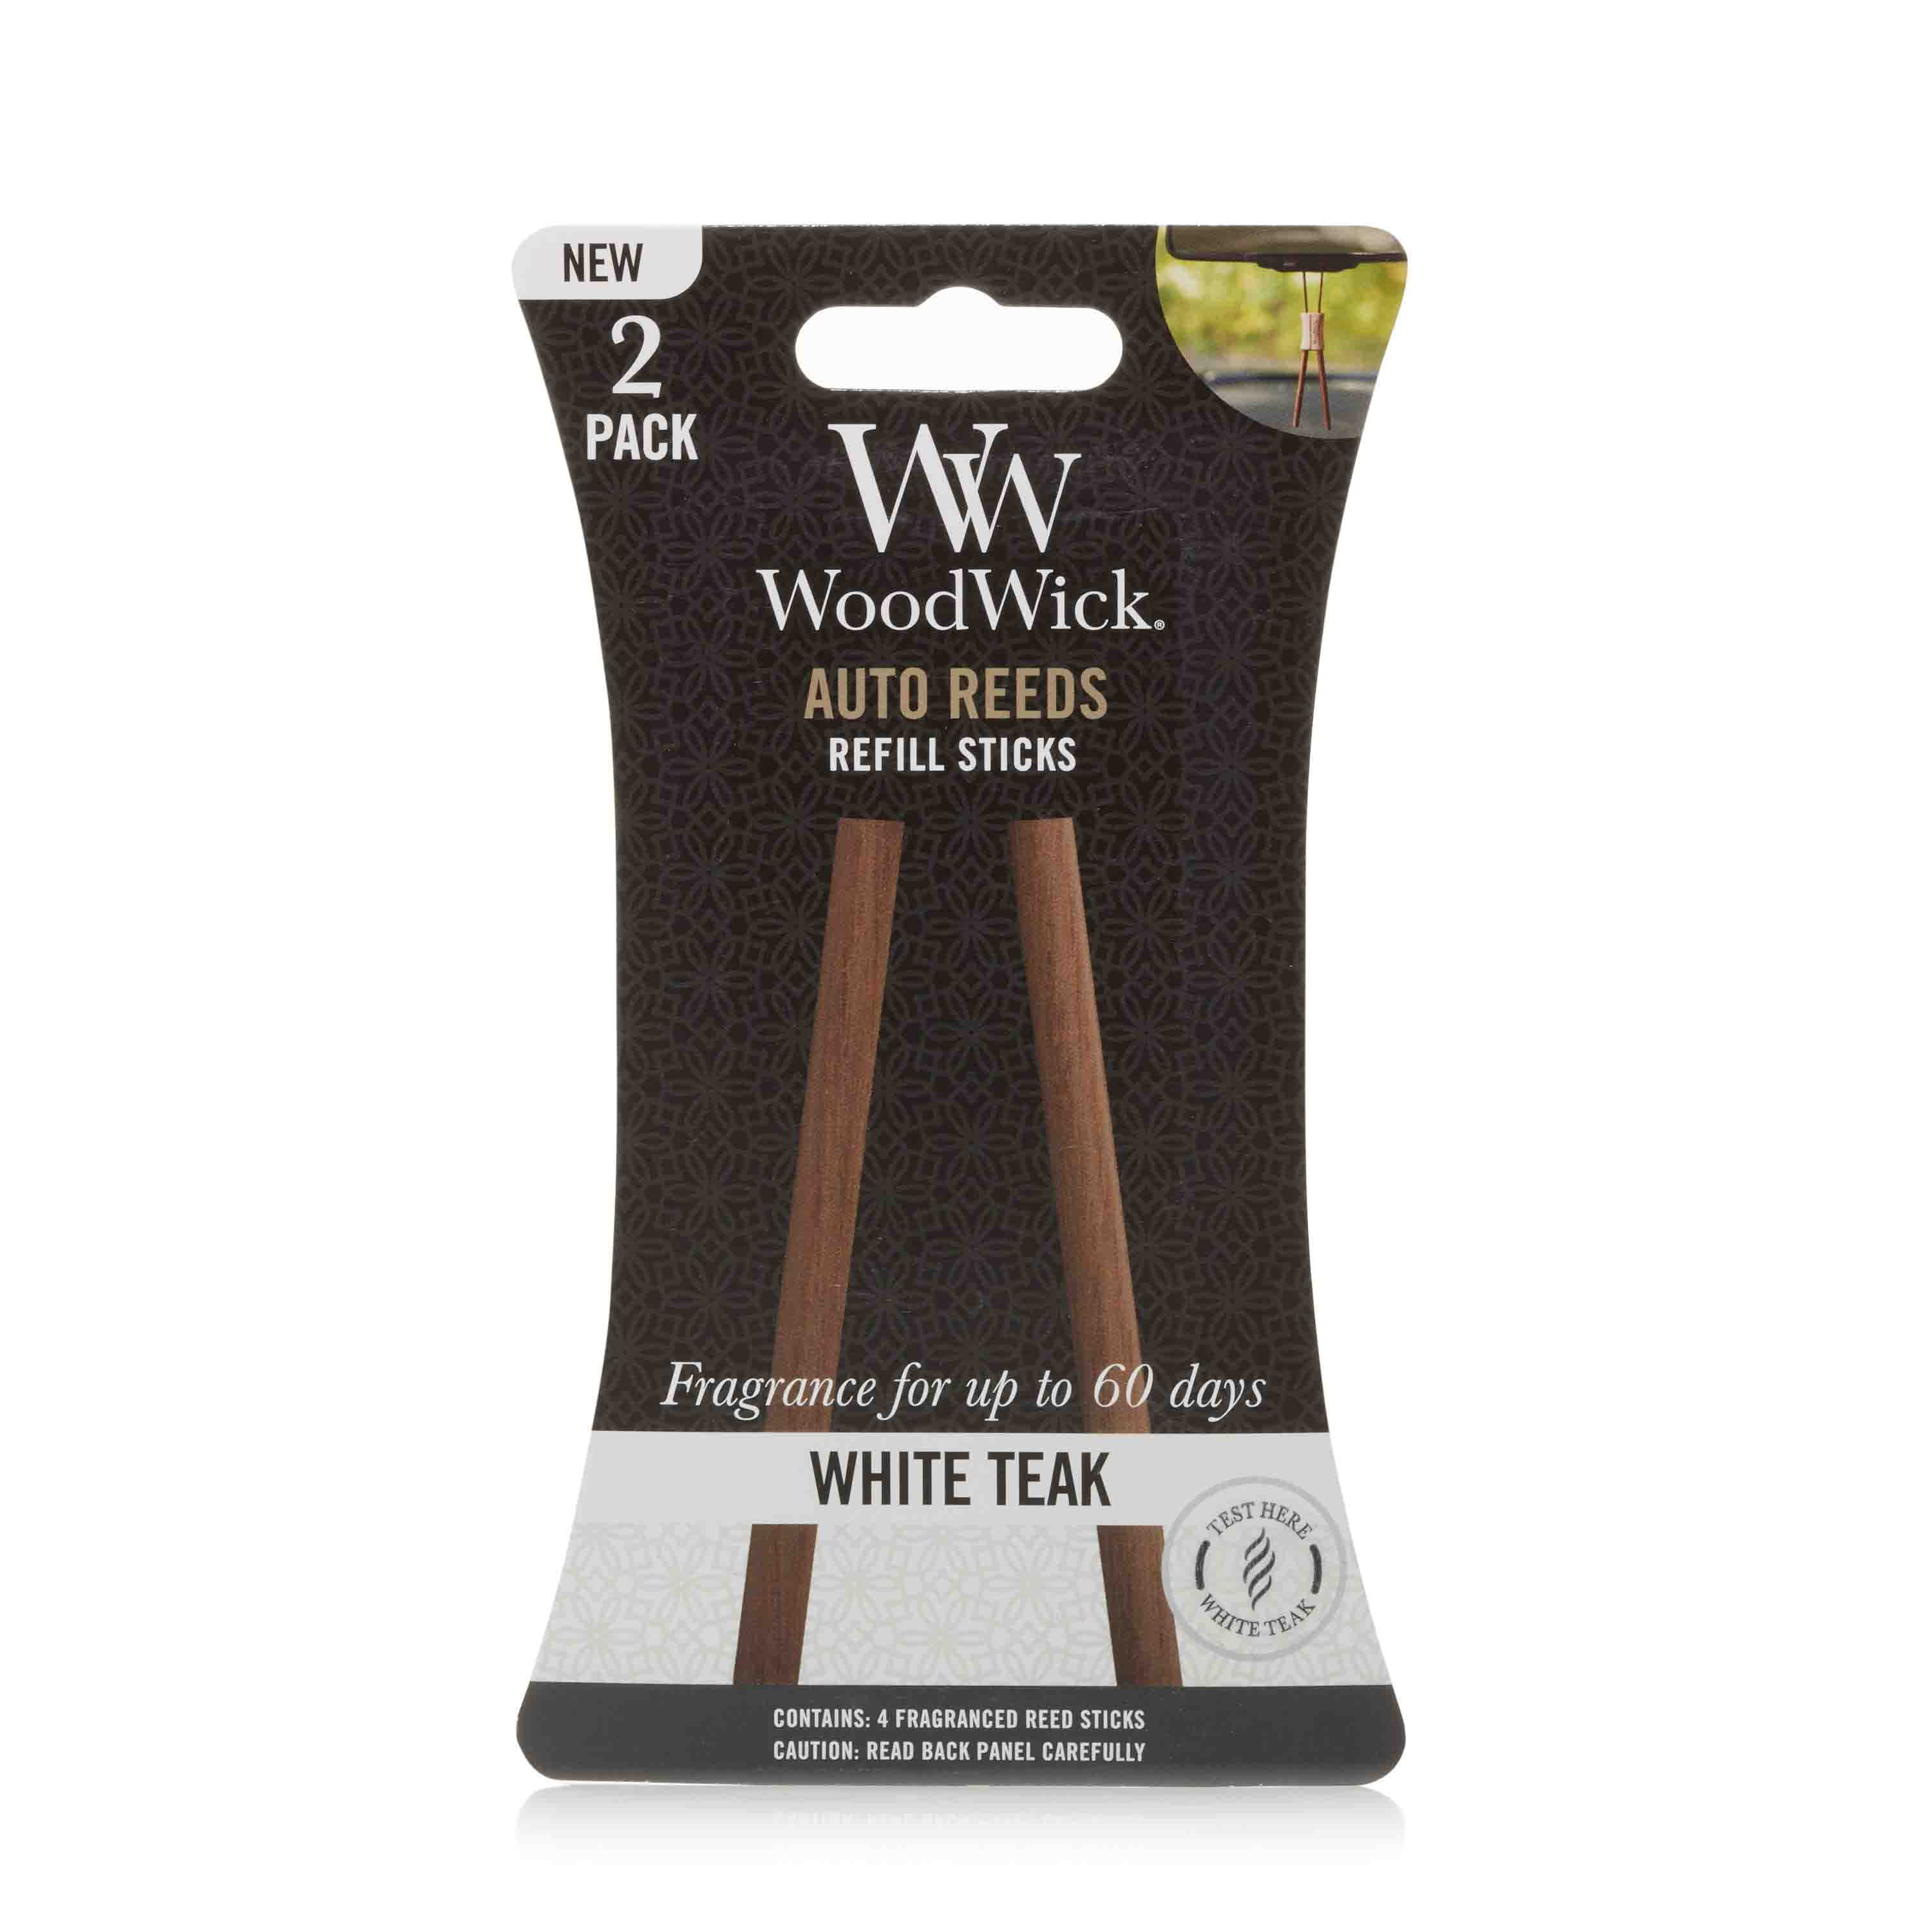 WoodWick White Teak Auto Reed Refills, 2 Pack, Car Air Freshener, Lasts up to 60 Days